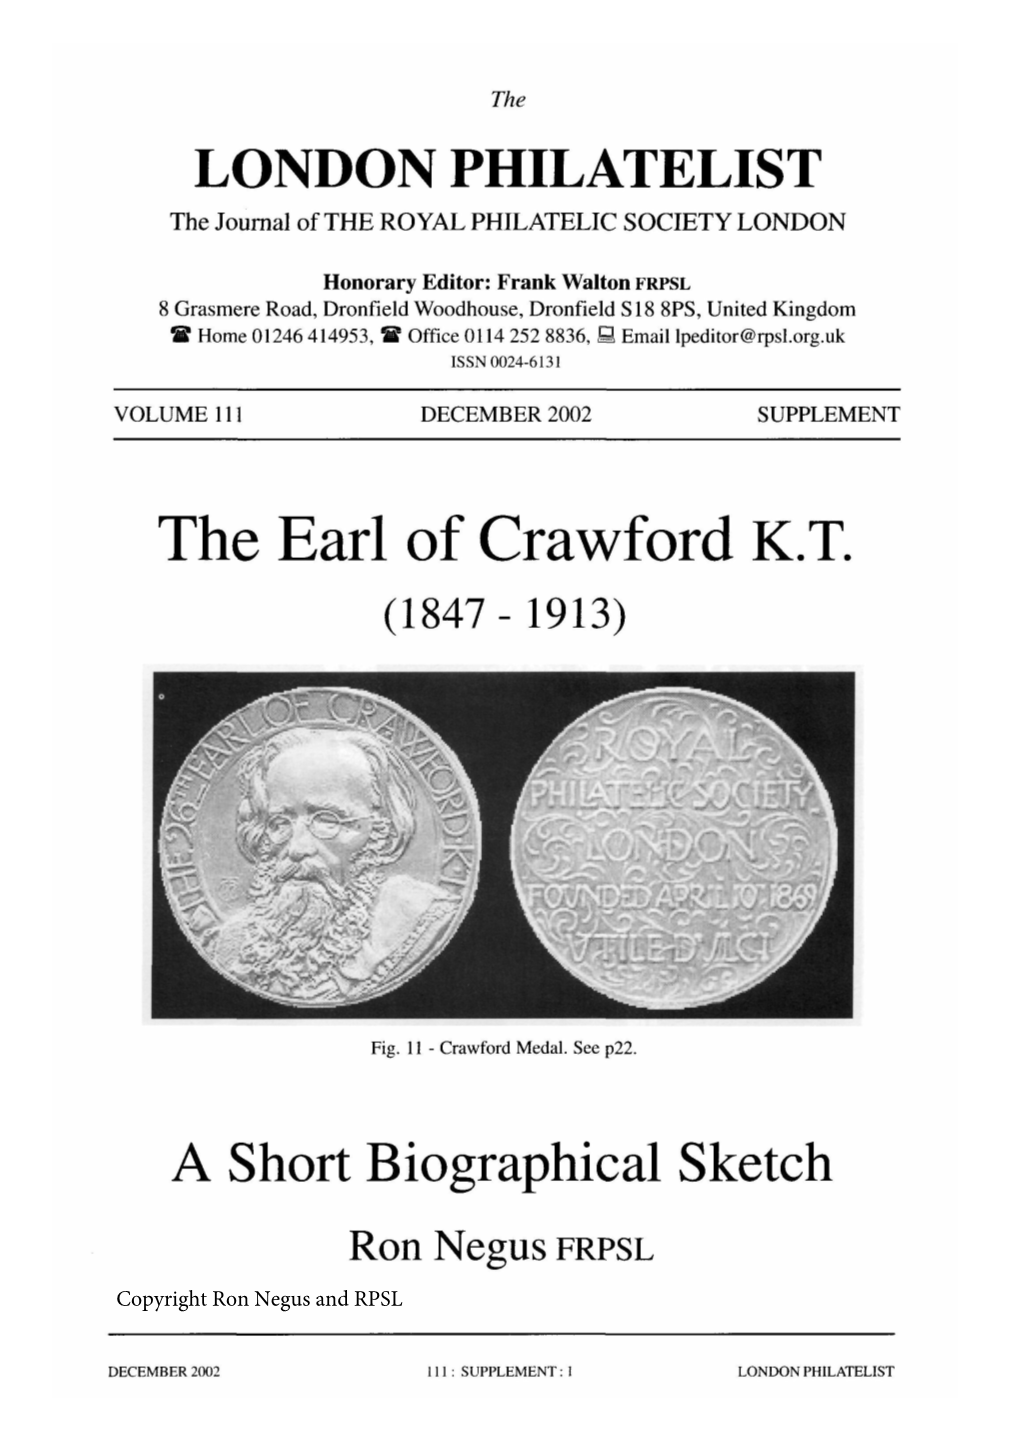 The Earl of Crawford K.T. (1847- 1913)